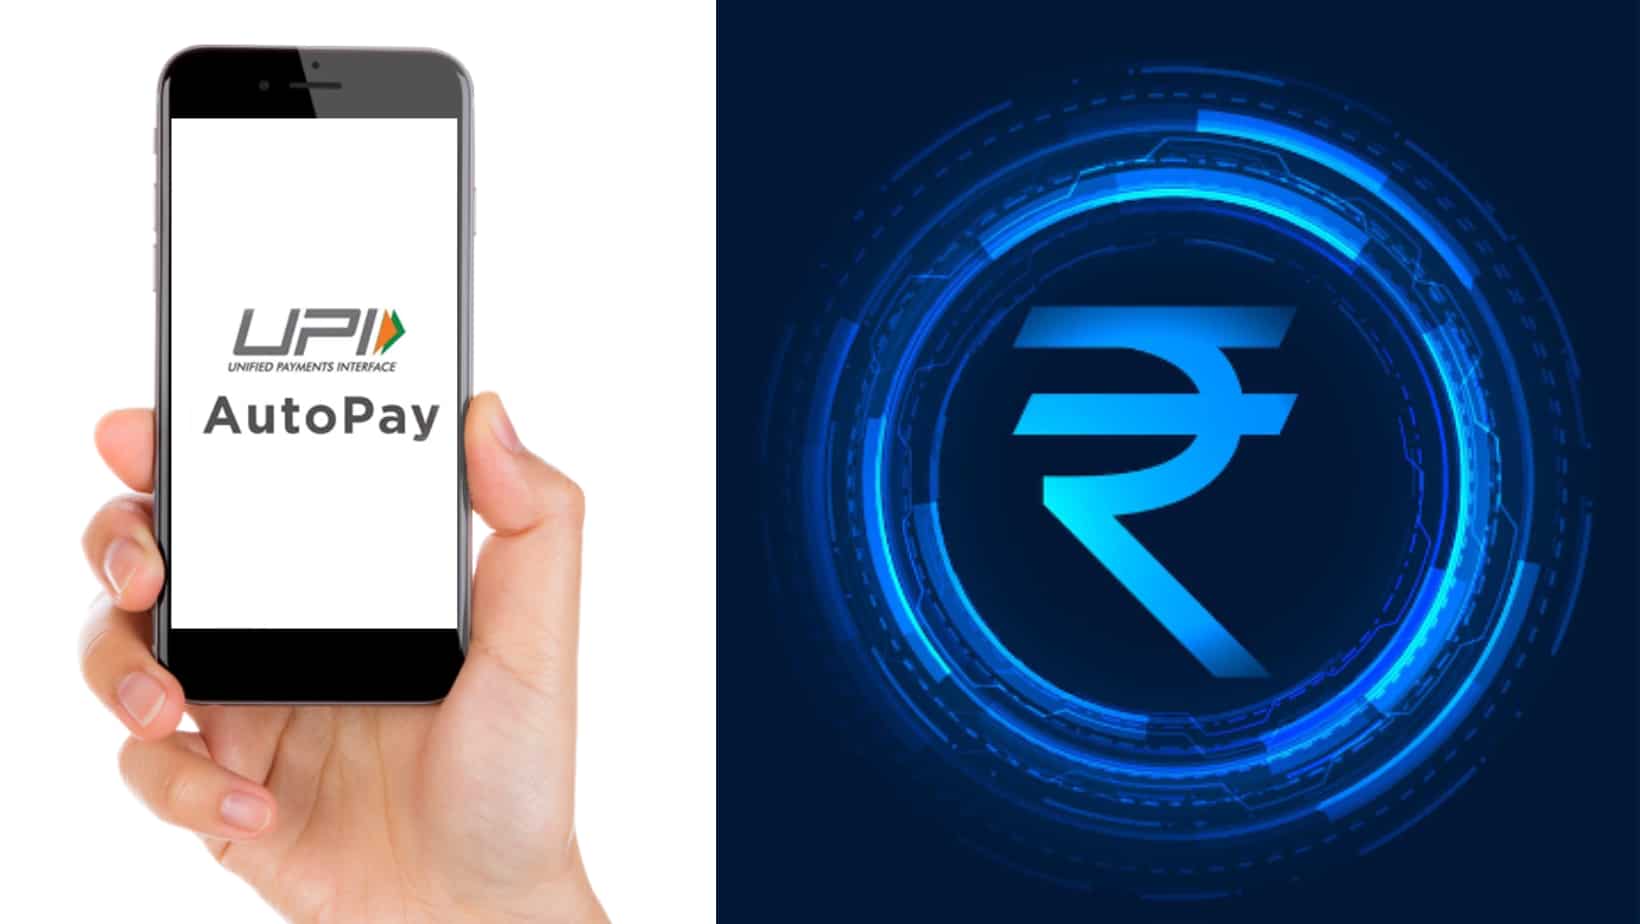 Central Bank Digital Currency launch: 5 key differences between UPI and e-Rupi – Explained